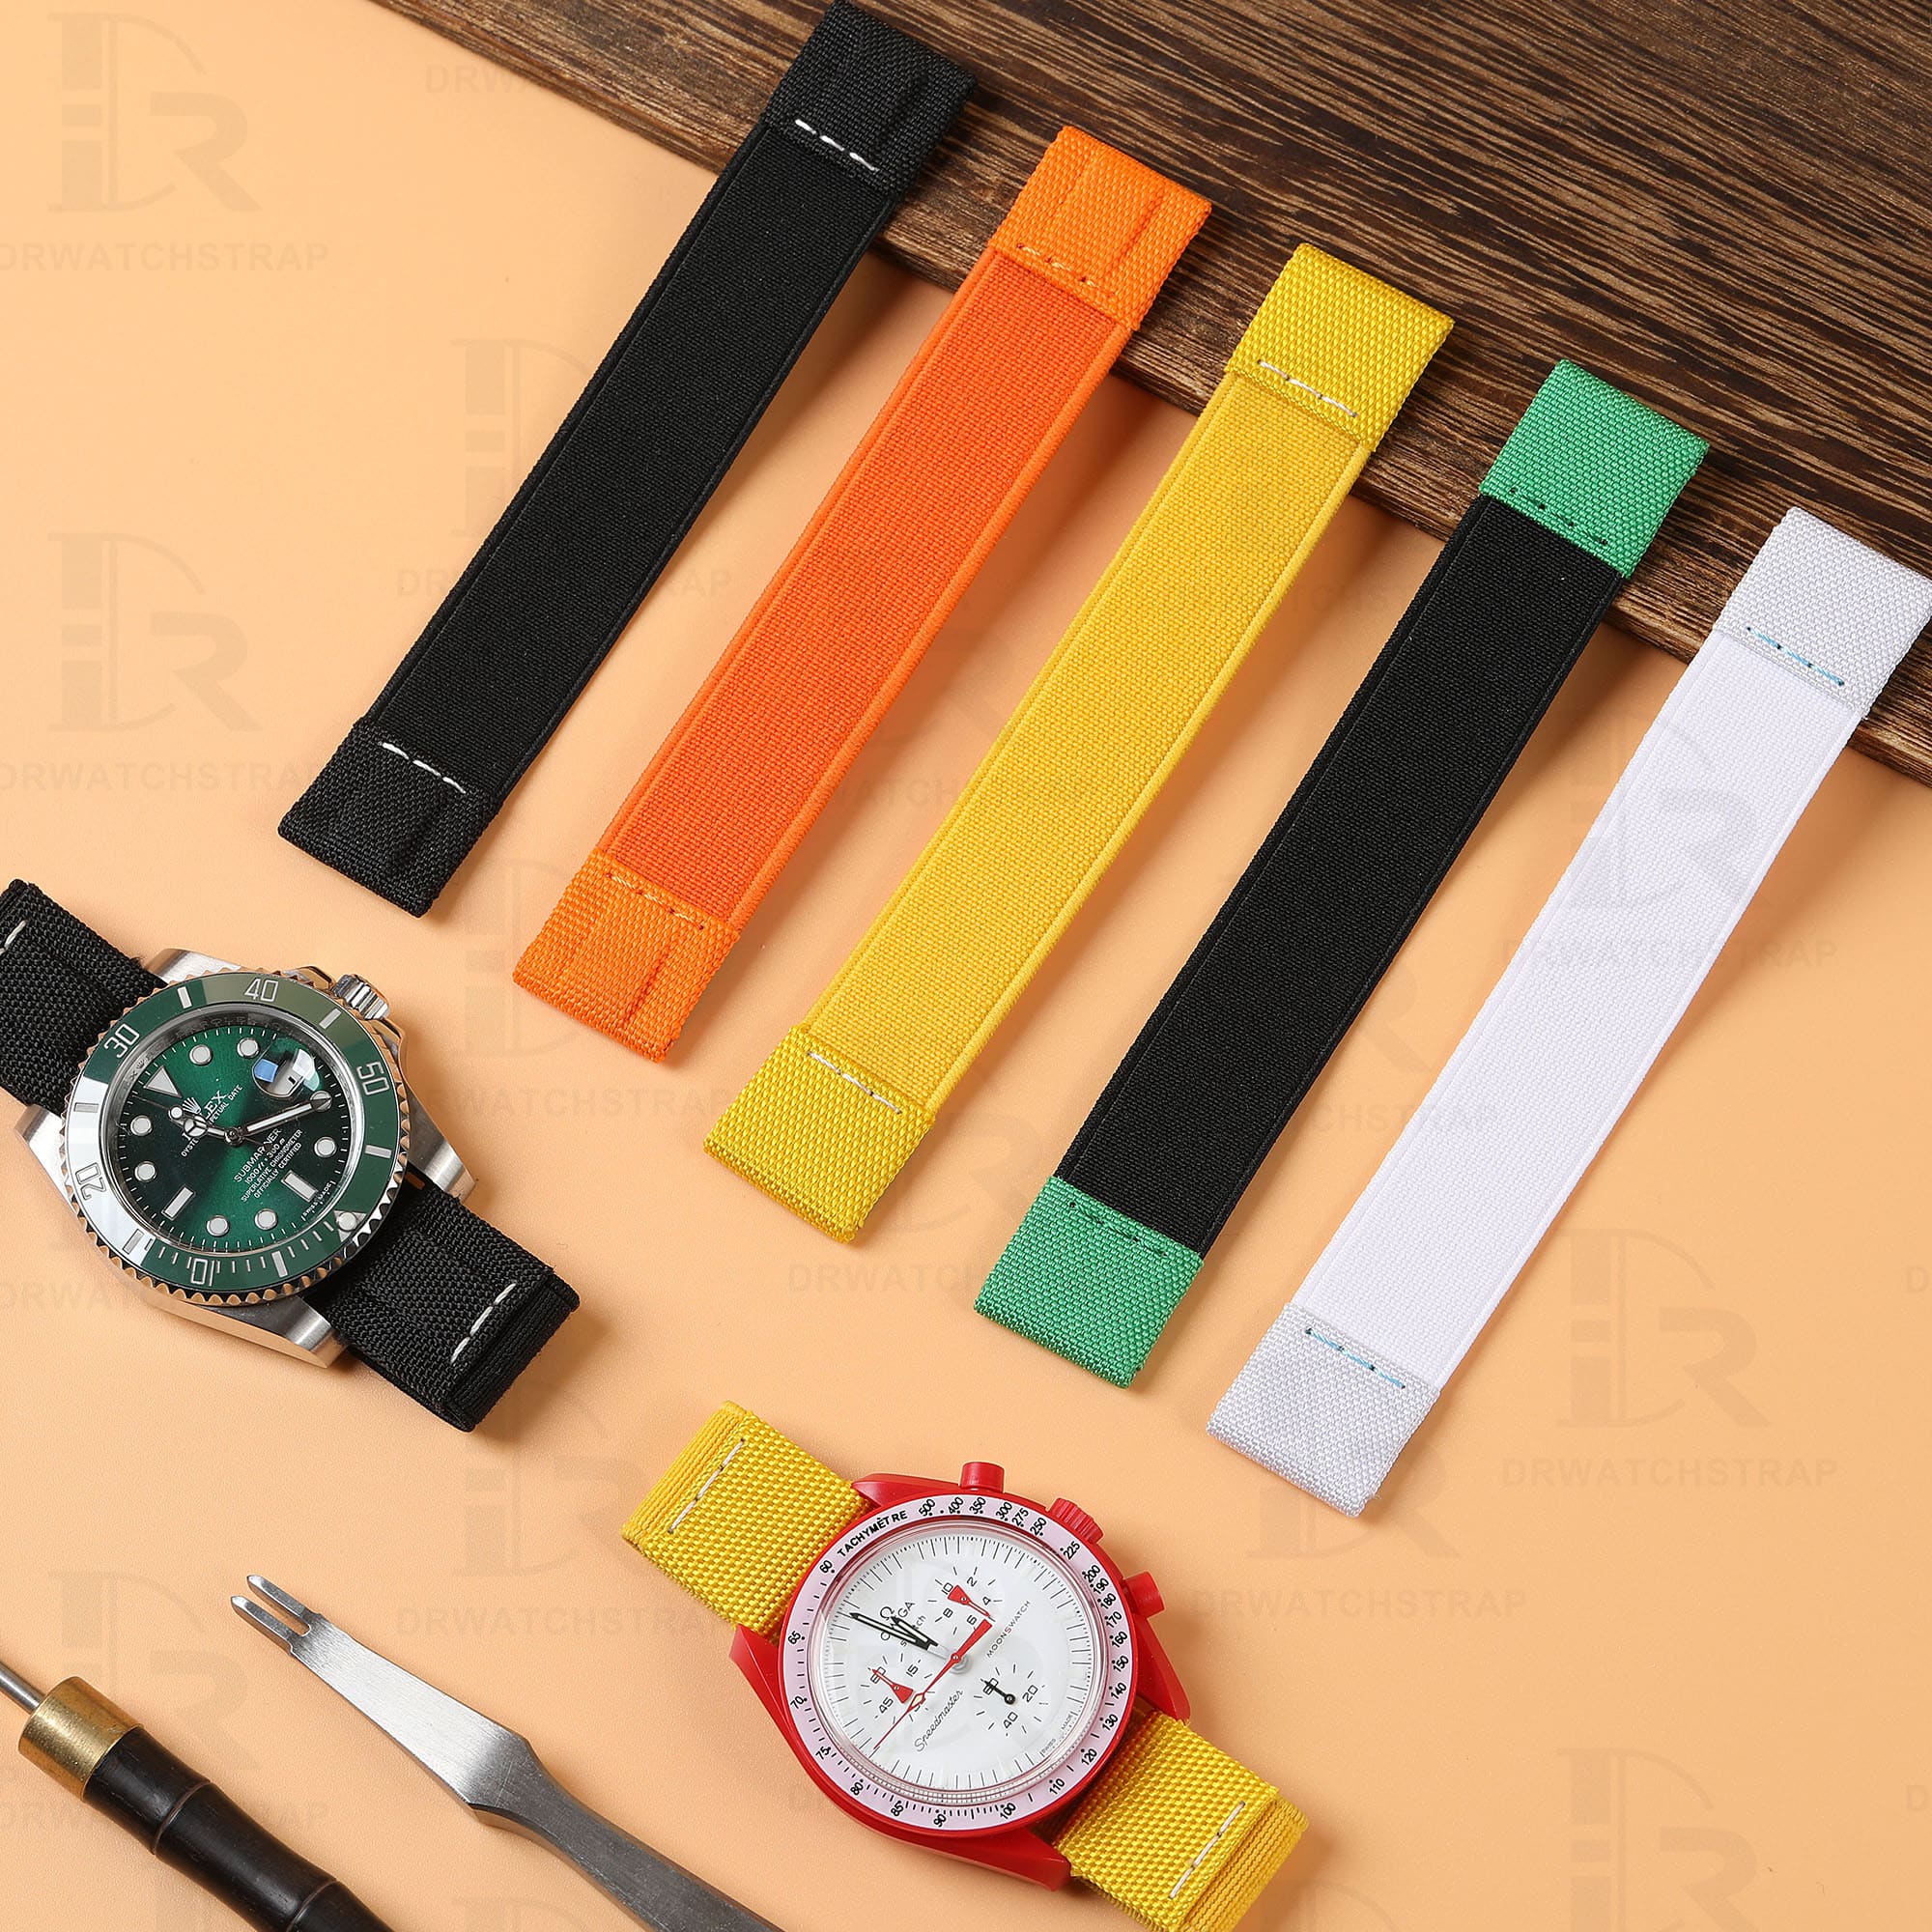 Custom handmade 20mm 21mm Elastic aftermarket yellow orange brown black white Omega watch band & watch strap replacement for Swatch Omega Speedmaster watch strap and buy best Omega Speedmaster straps online from DR watchstrap at a low price